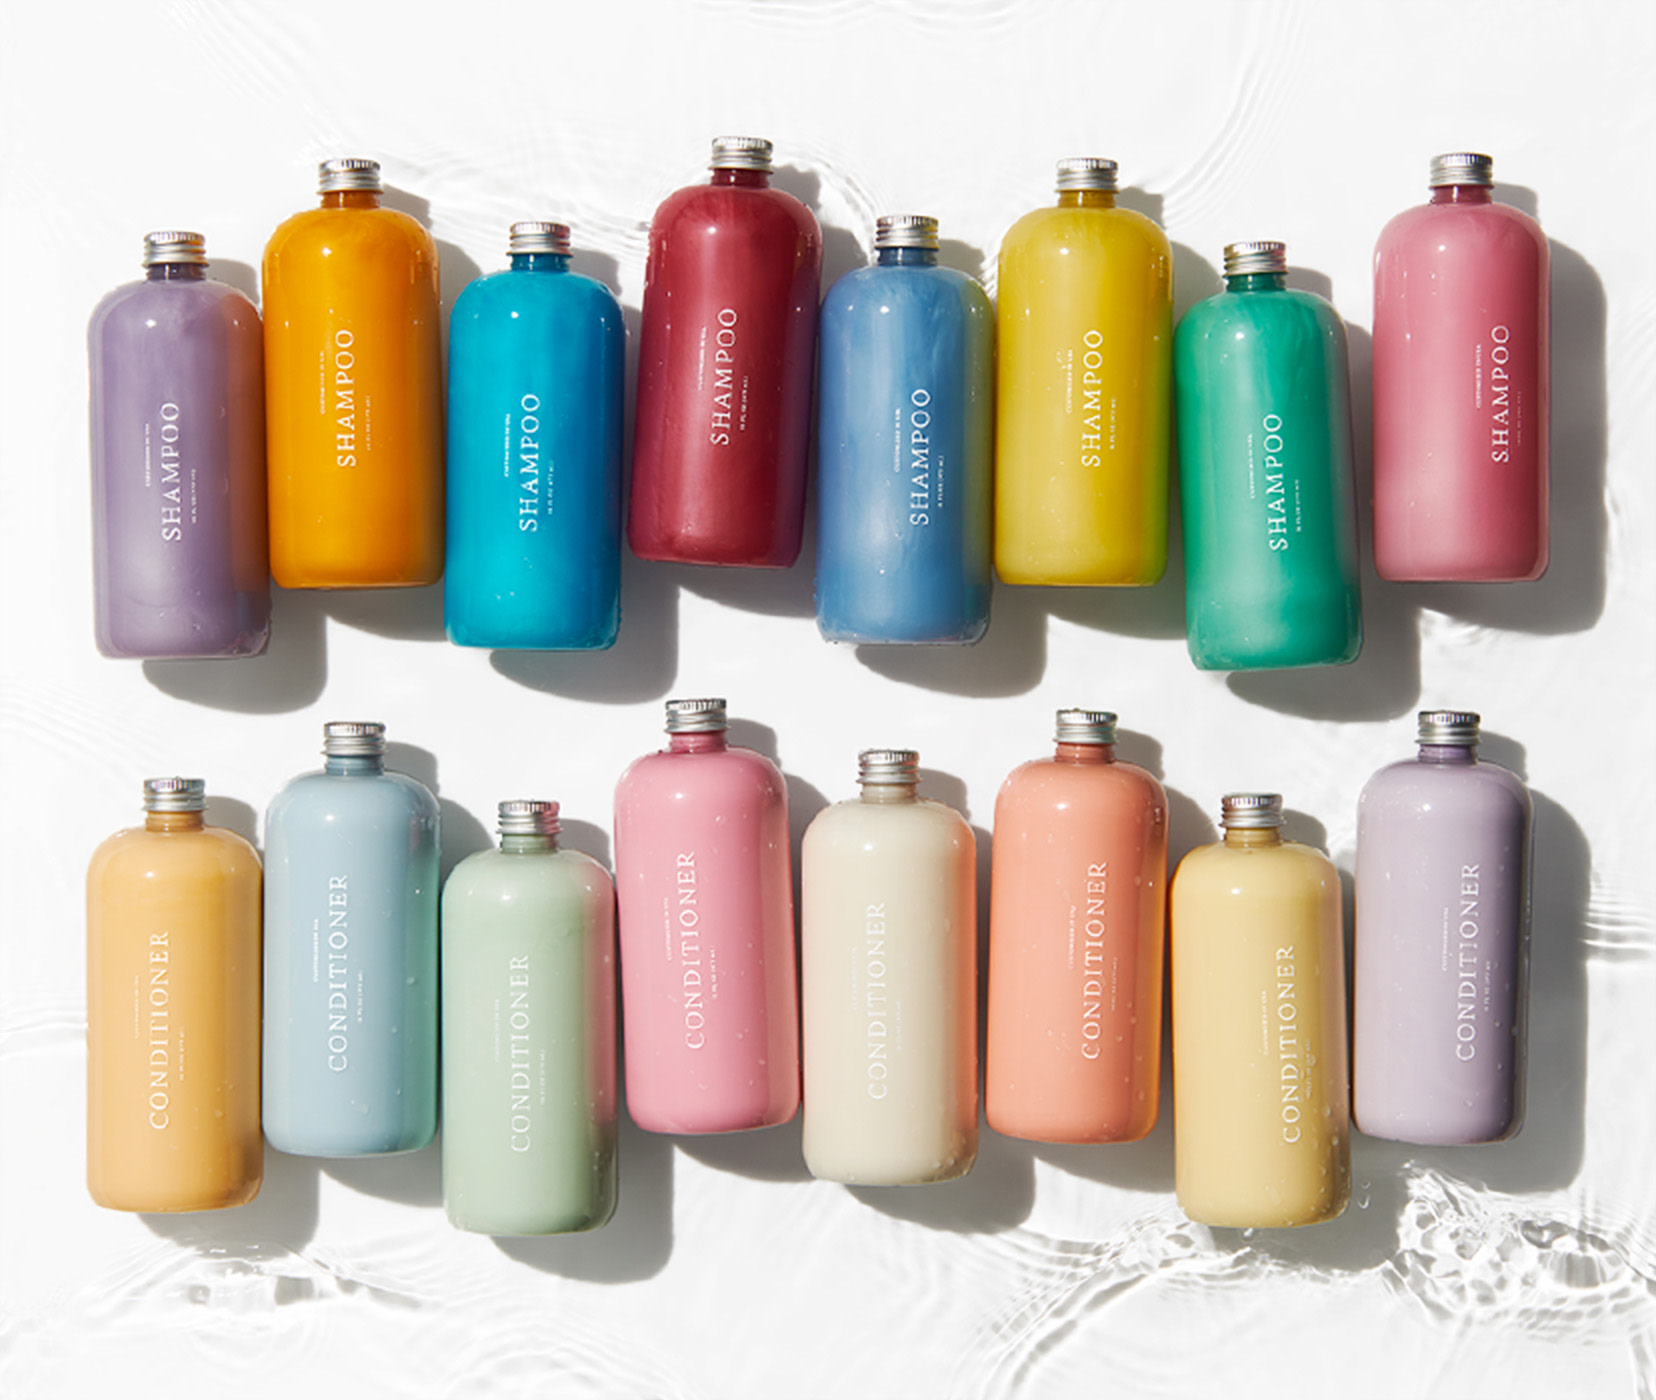 Customized shampoo bottles lined up in every color in horizontal row. Customized conditioner bottles lined up in every color below shampoos in horizontal row.